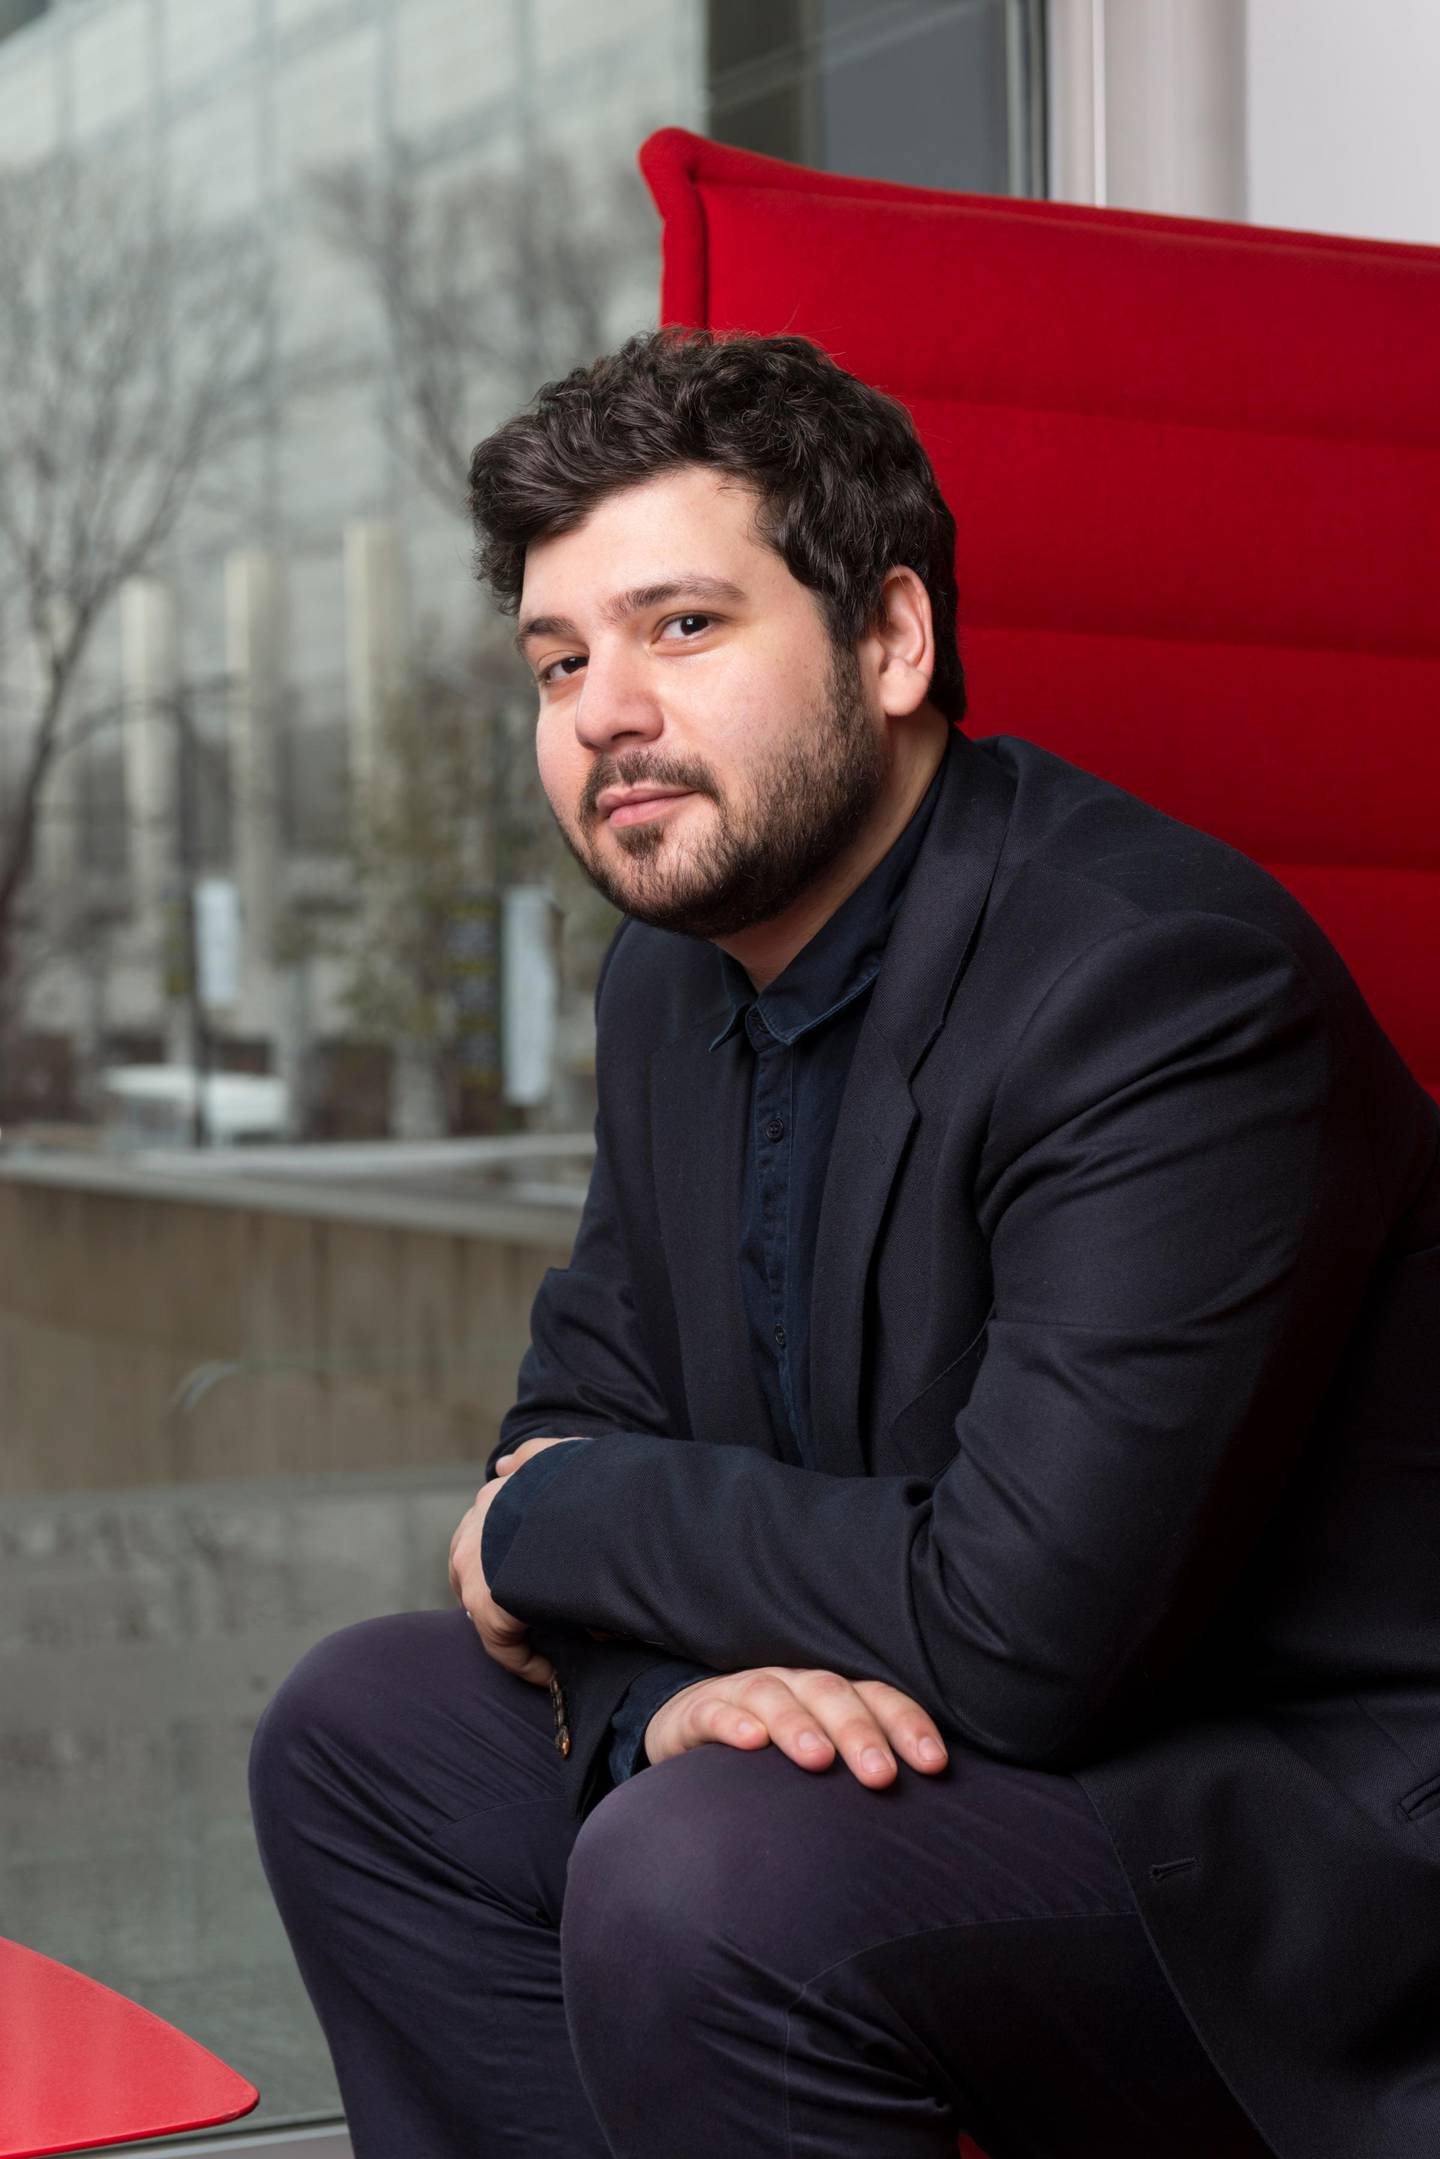 Writer, curator and editor Omar Kholeif, has been voted one of the 100 most powerful people in the art world for three years running. Nathan Keay © MCA Chicago